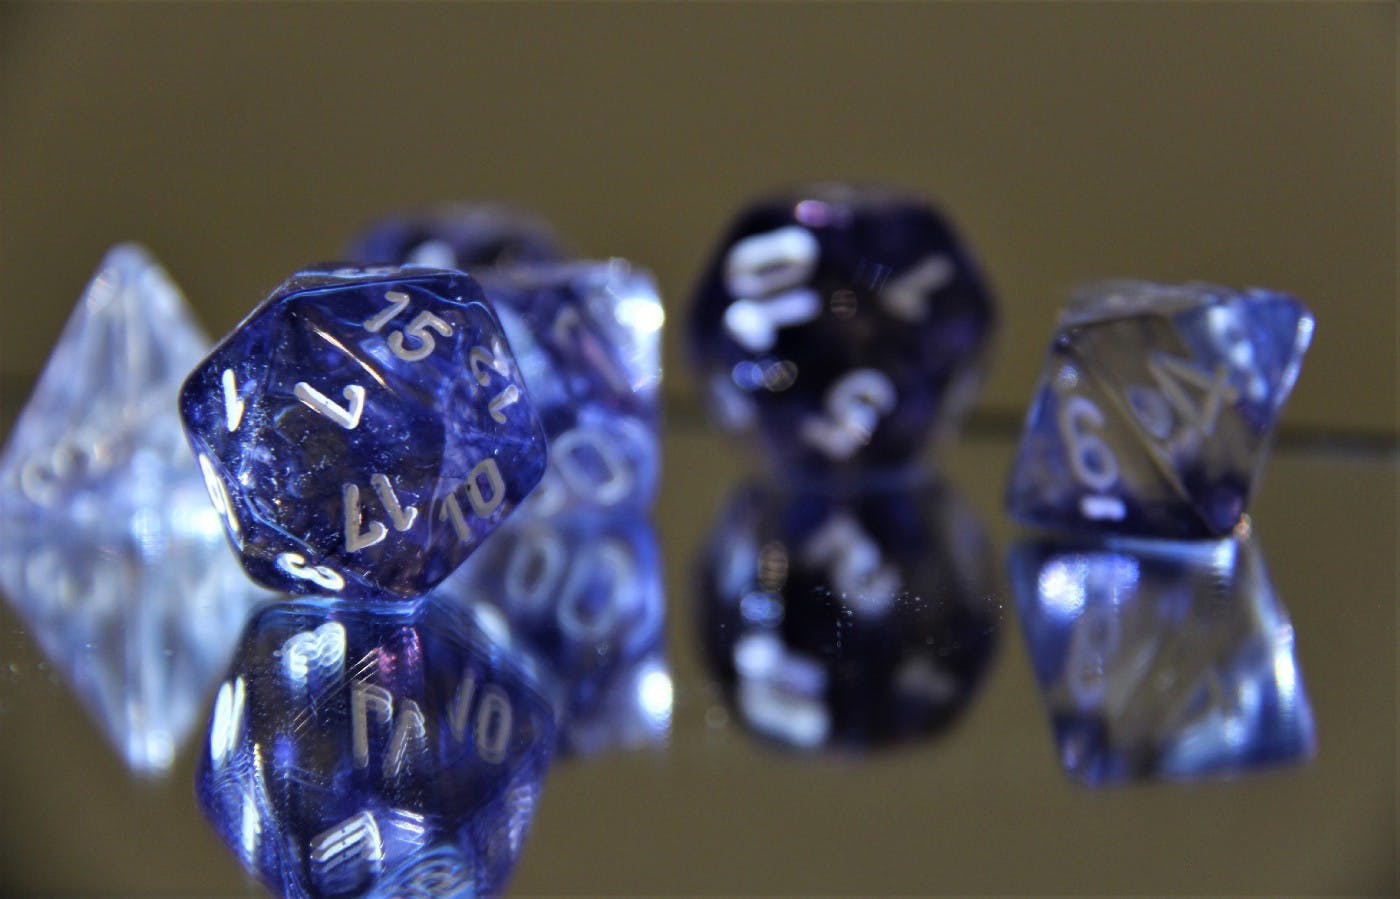 some blue and white dice